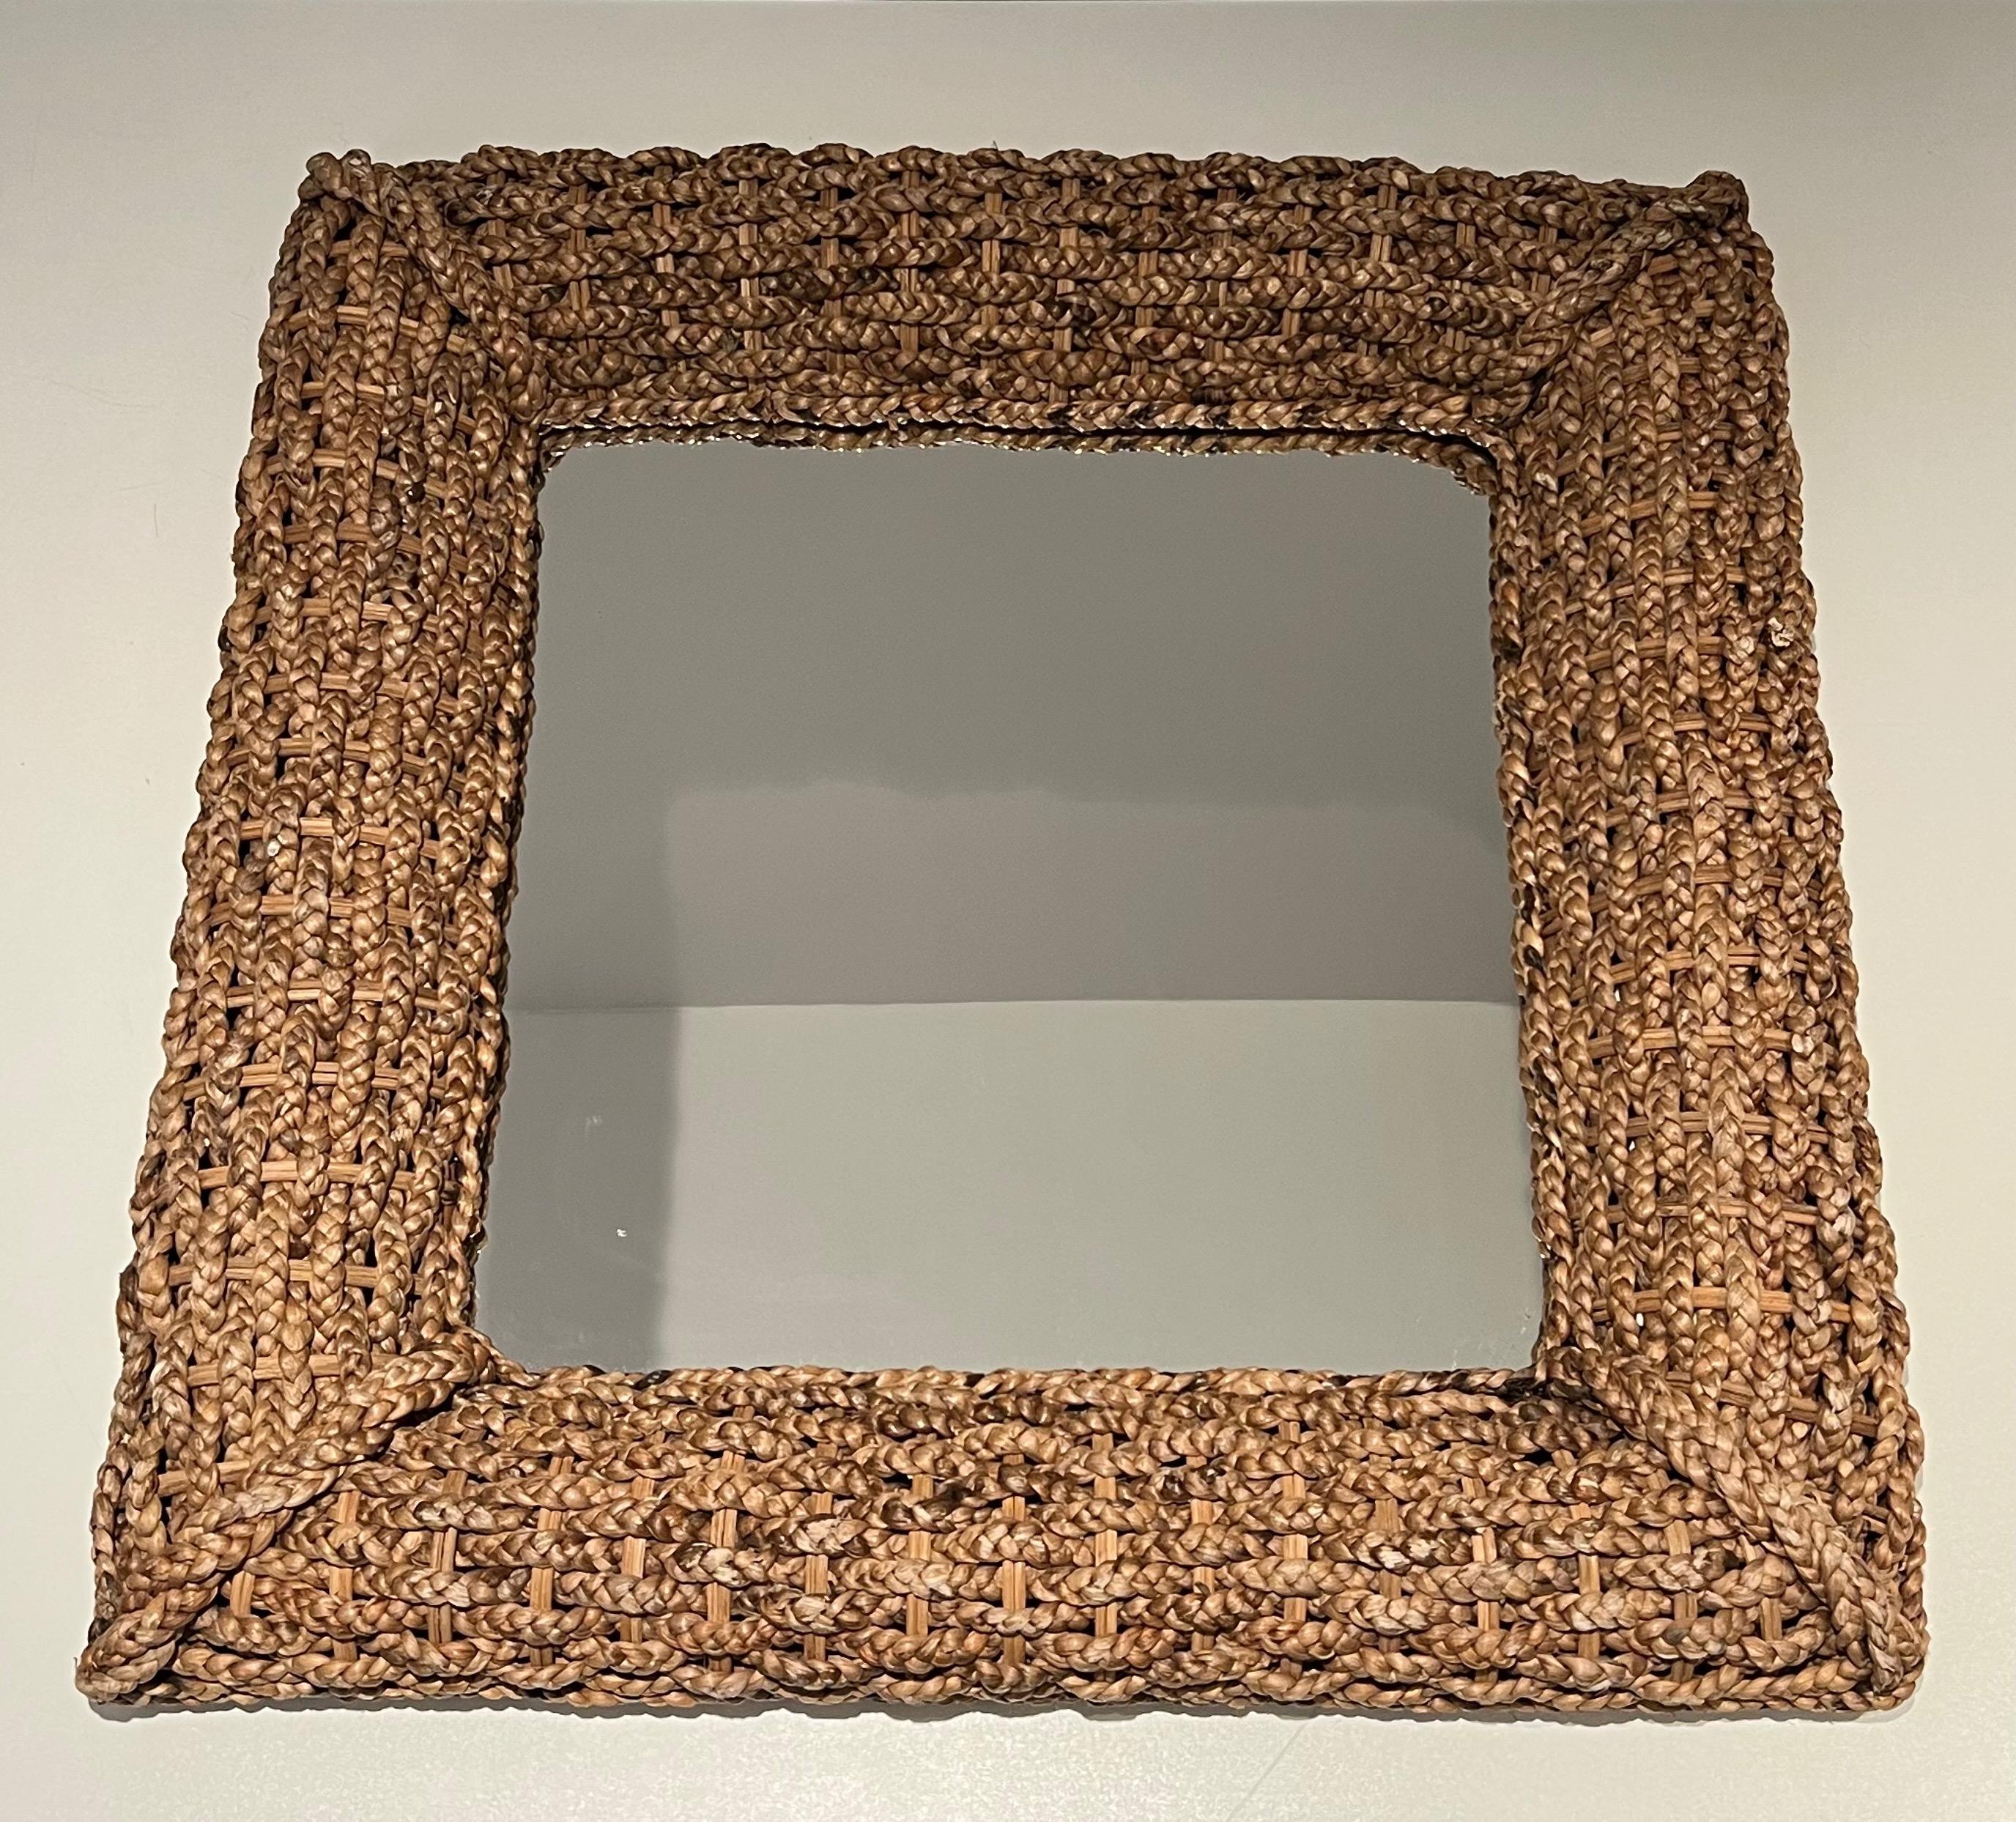 This very nice and decorative thick mirror is made of a nice rope work. This is a French work attributed to famous designers Adrien Audoux and Frida Minet. Circa 1950